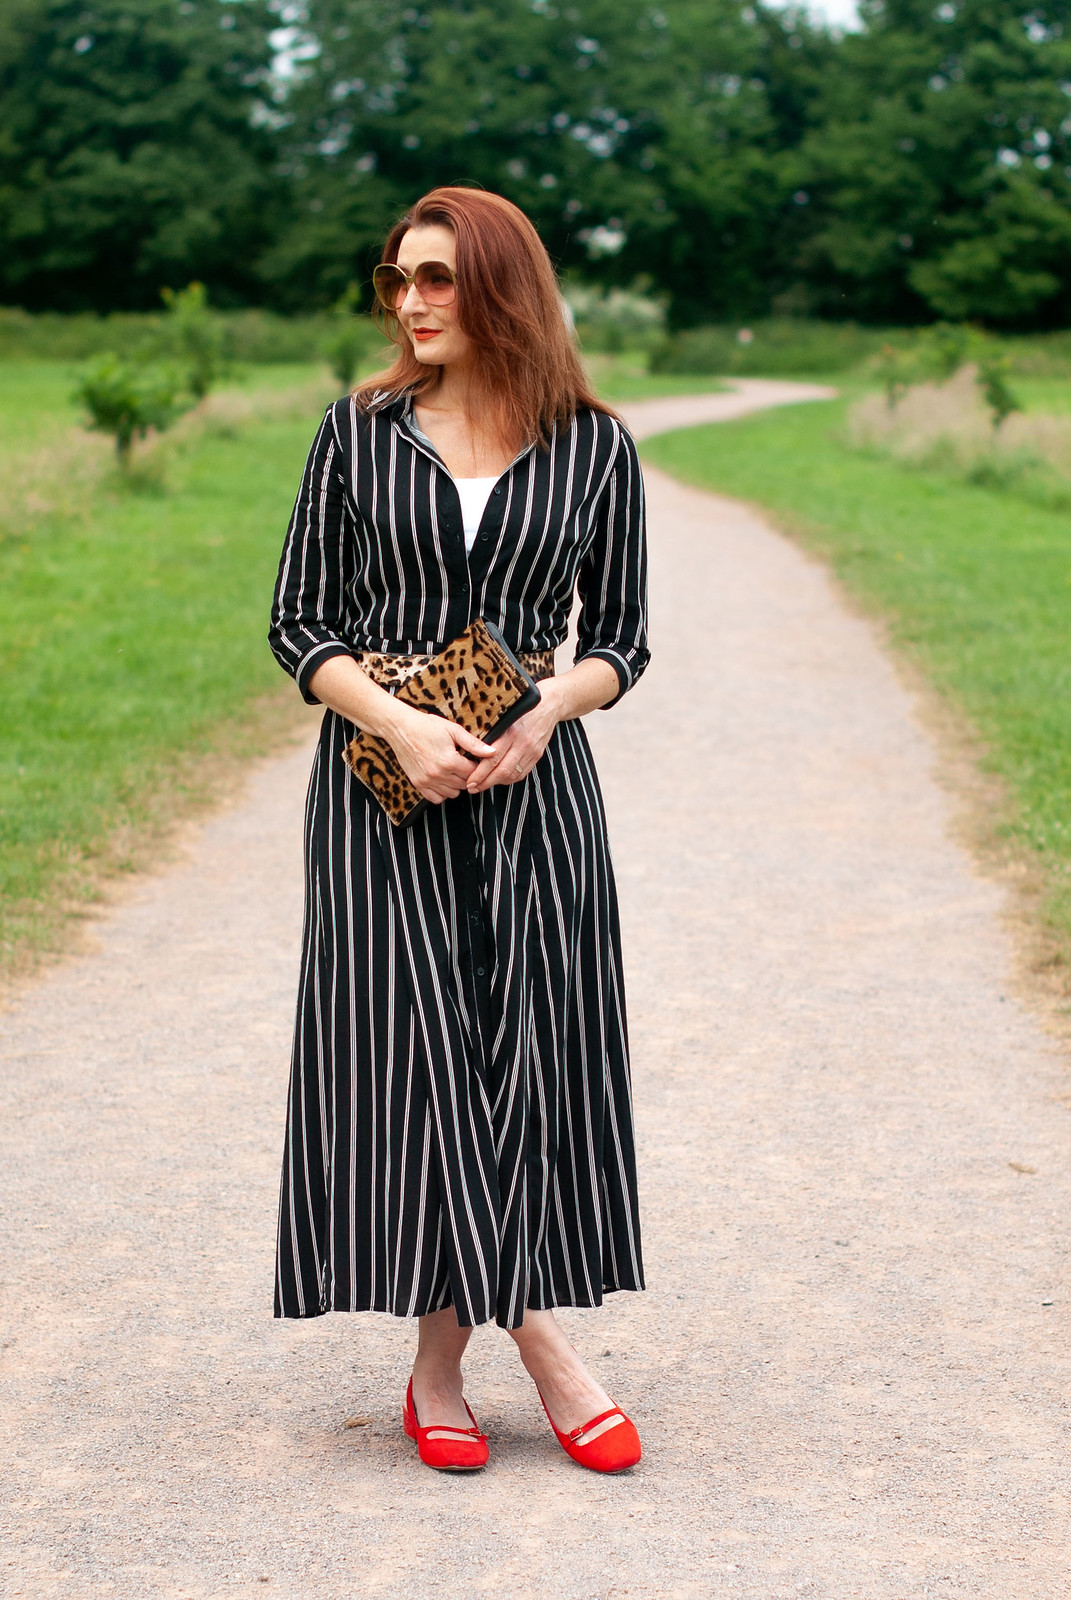 How to Style a Summer Shirt Dress With Pattern Mixing \ black and white striped midi shirt dress \ leopard clutch and belt \ red slingback block heel shoes | Not Dressed As Lamb, over 40 style